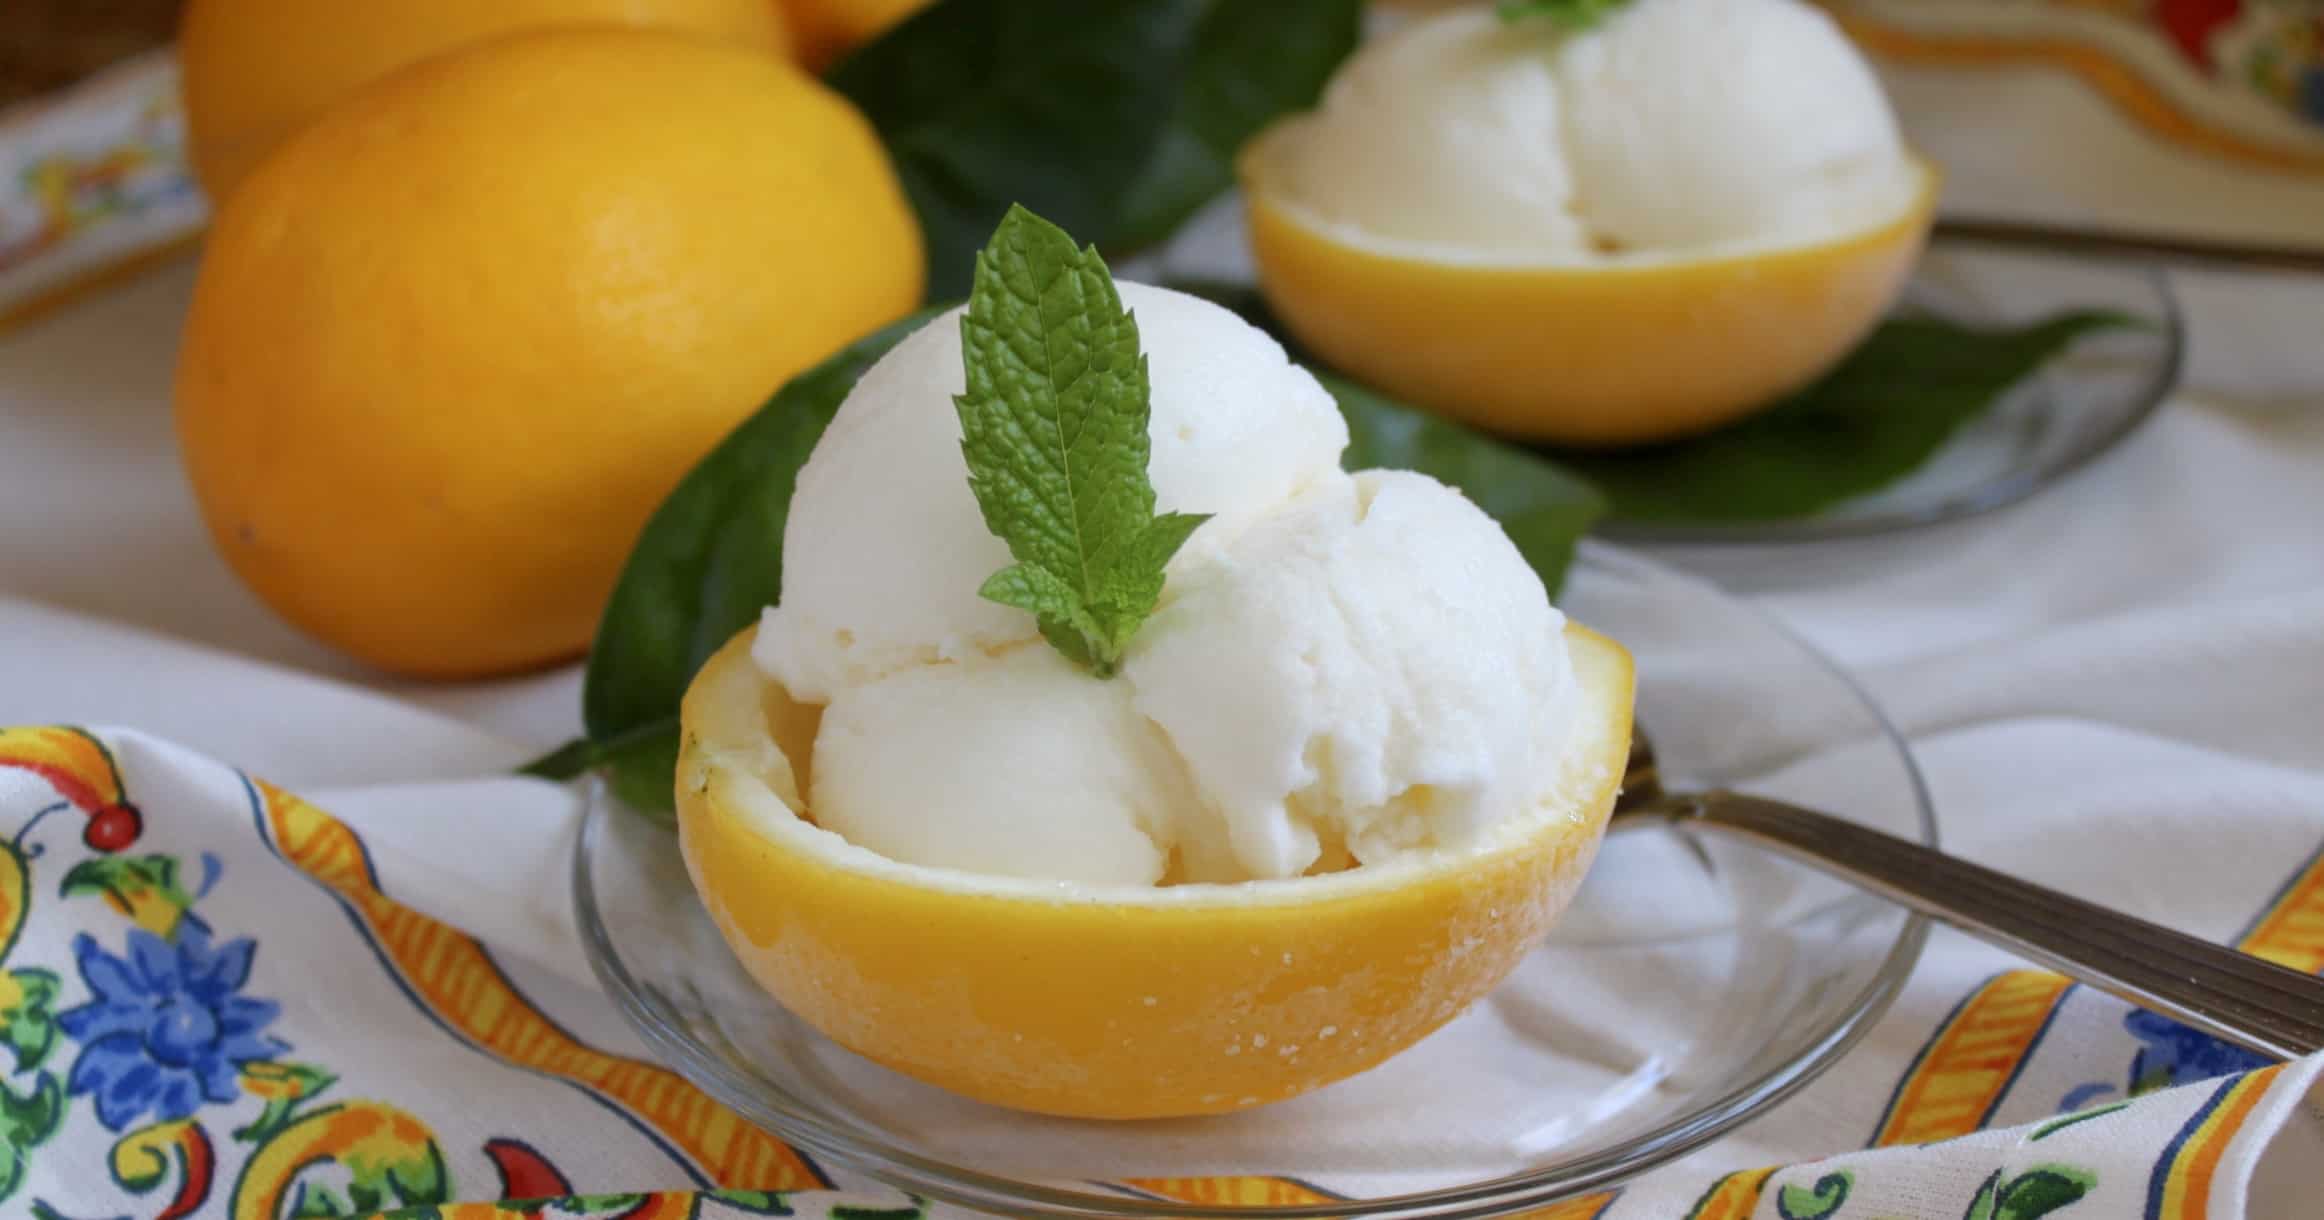 Lemons cut in half and filled with ice cream and topped with mint leaves as garnish on a clear glass plate with a spoon.